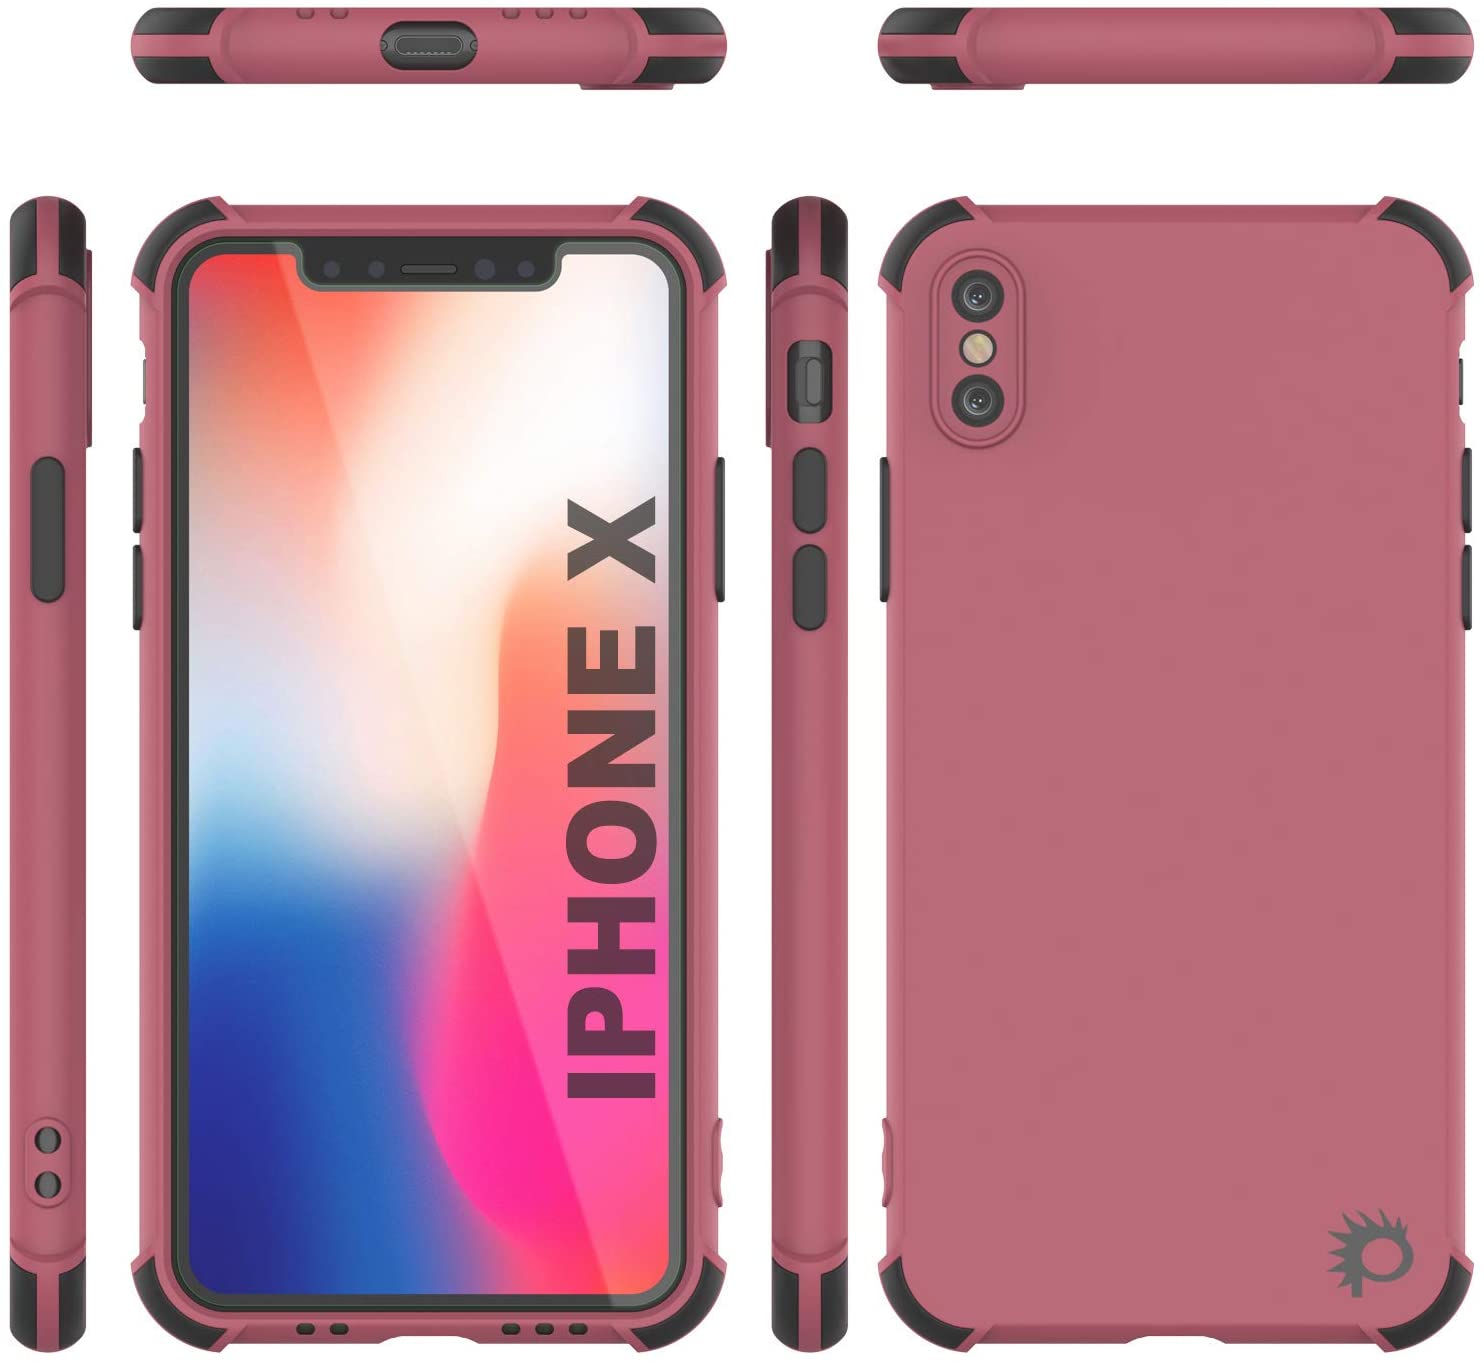 Punkcase Protective & Lightweight TPU Case [Sunshine Series] for iPhone X [Rose]